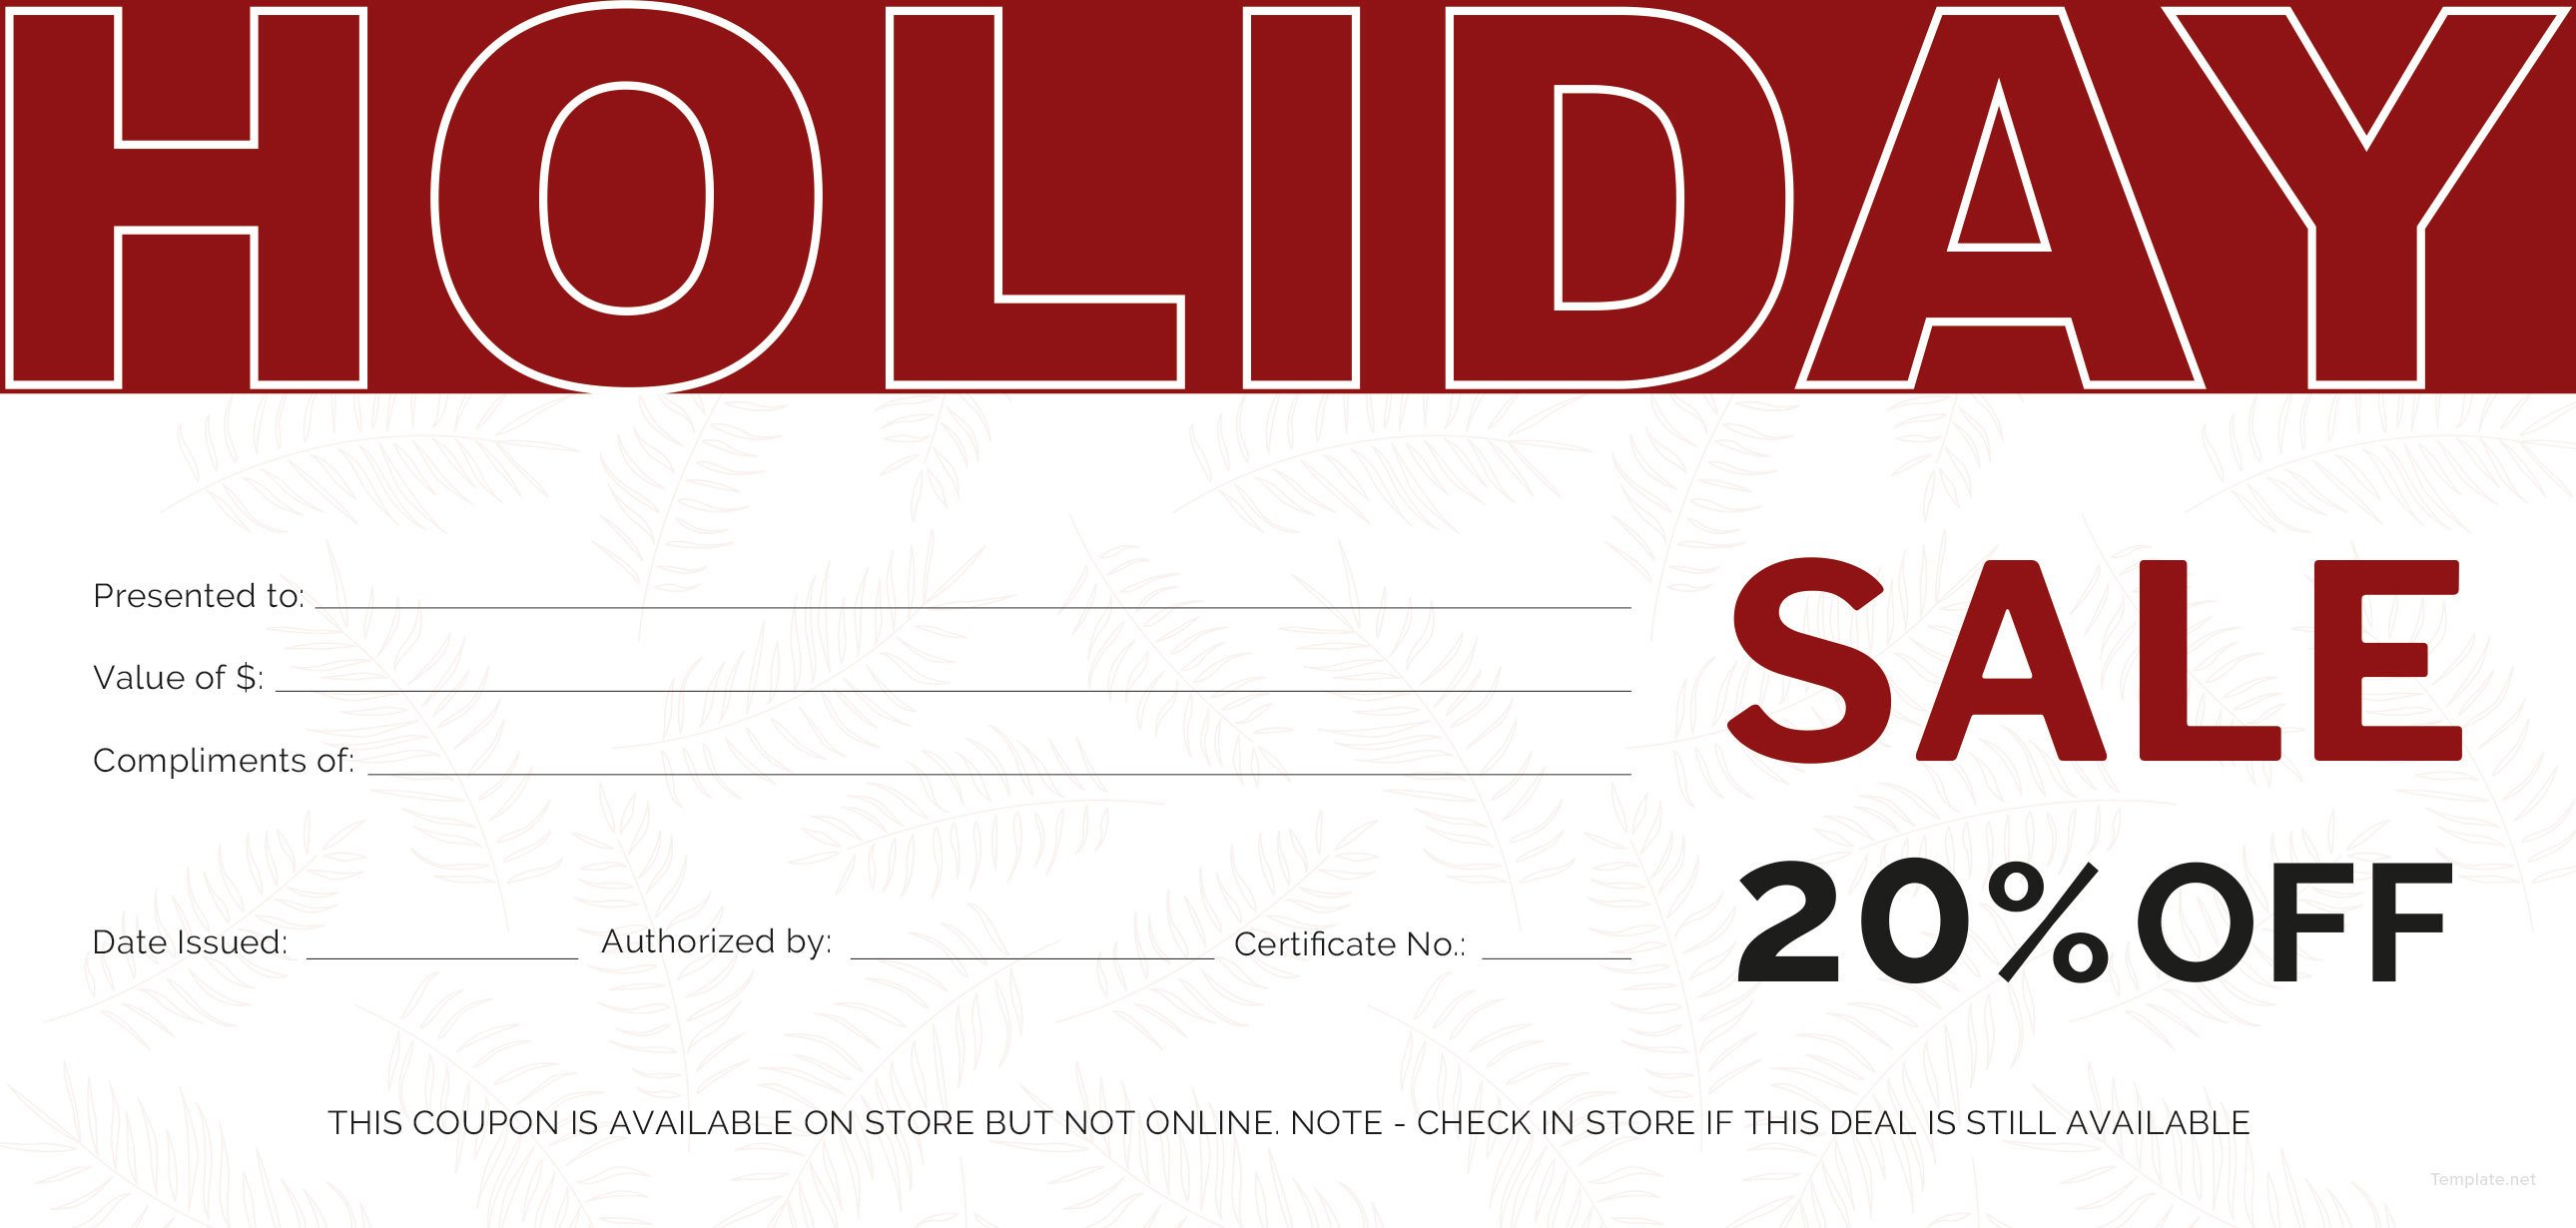 free-holiday-gift-voucher-template-in-adobe-photoshop-illustrator